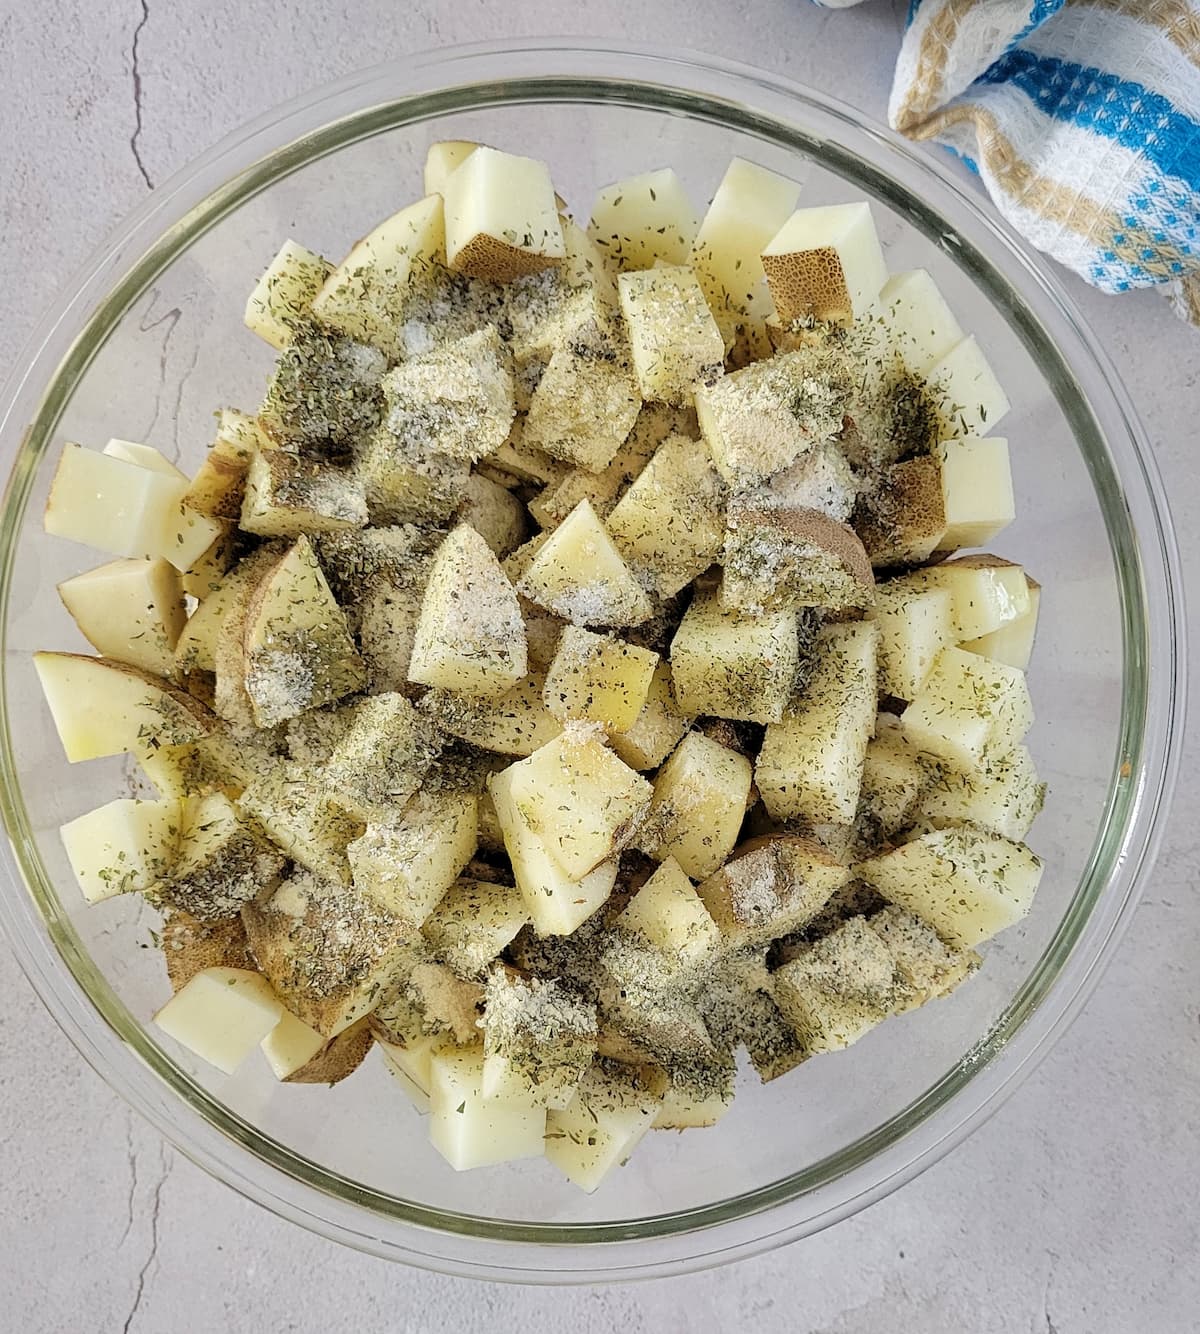 bowl of raw cubed potatoes with seasonings on top